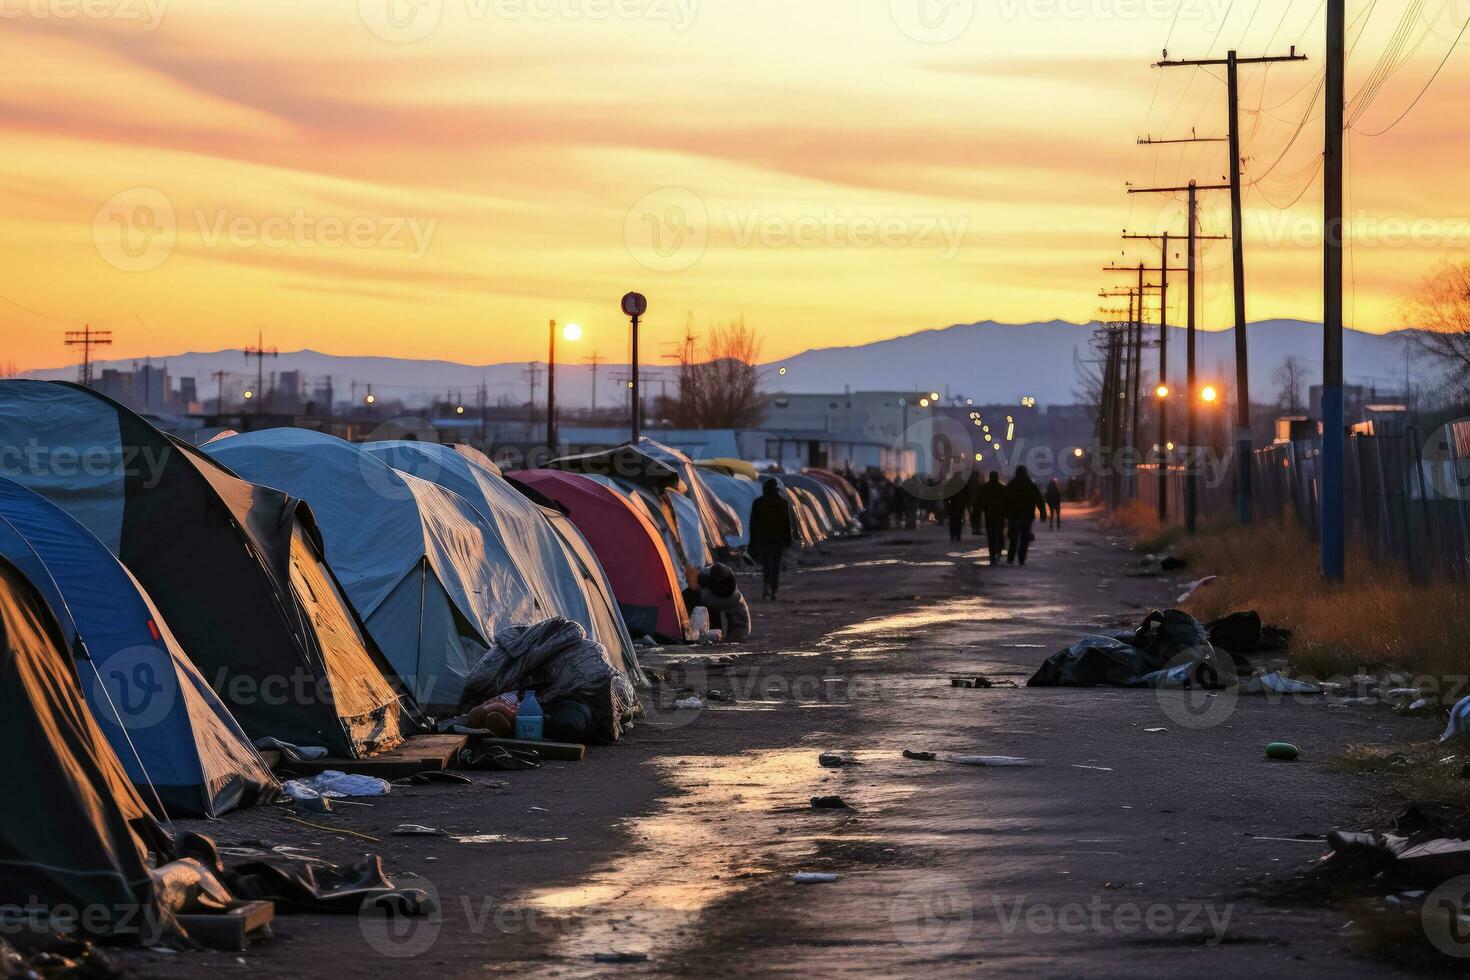 Refugee camp multitude of tents sheltering photo